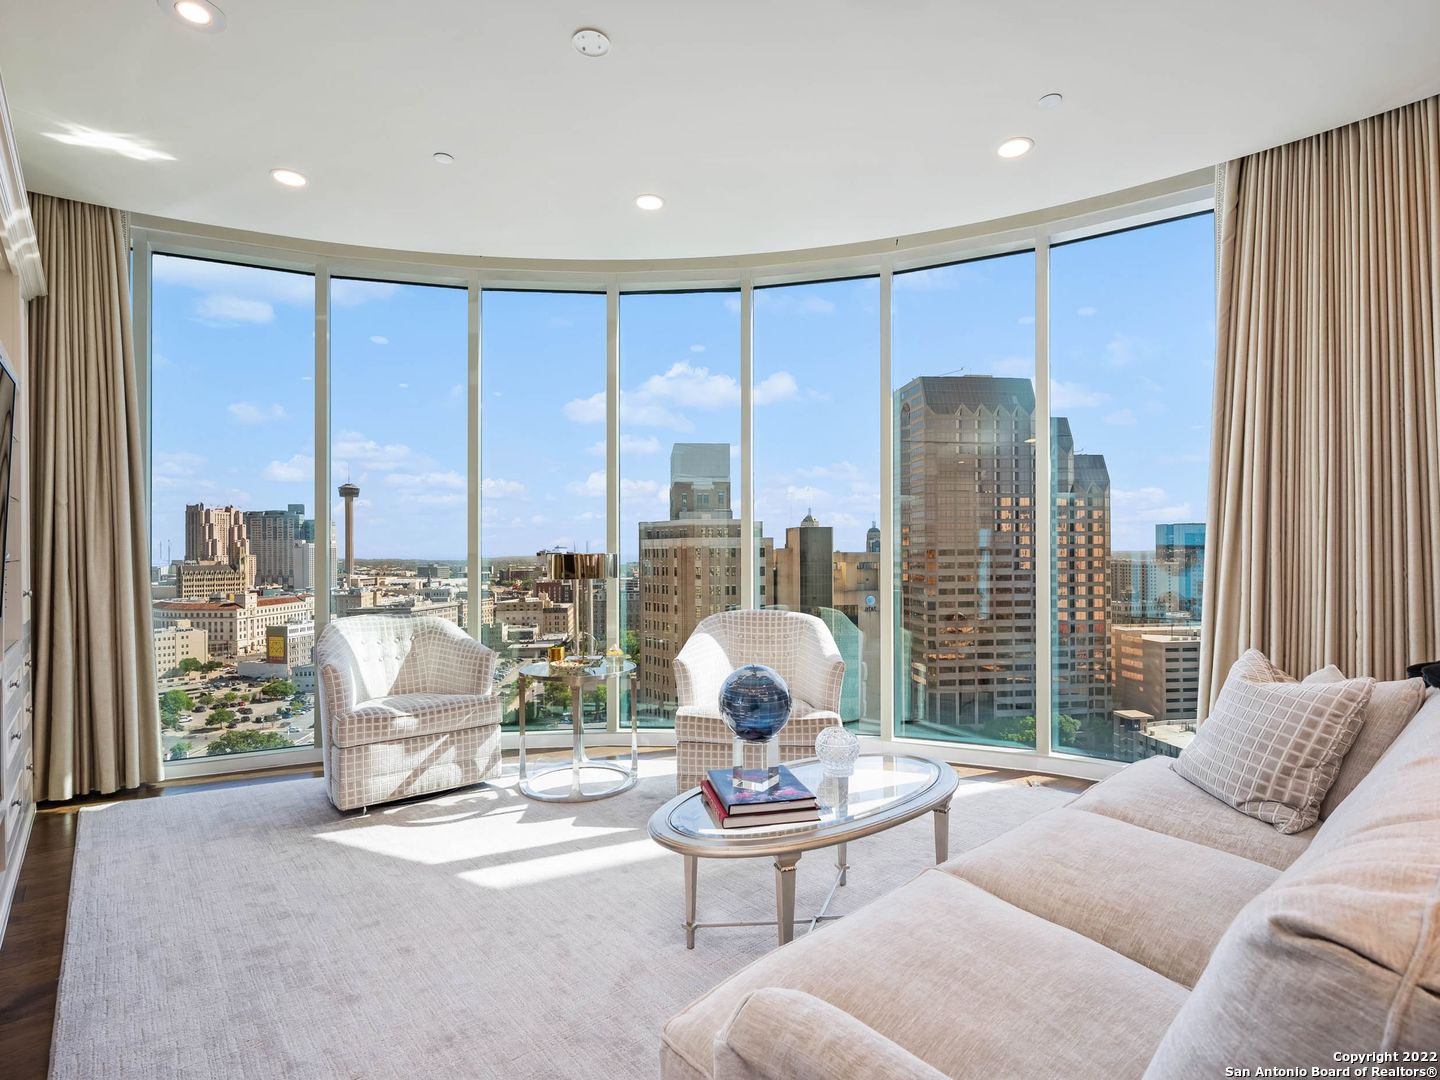 This 2,116 square foot residence has expansive living areas and stunning downtown views through a huge curved glass wall. The Picasso floor plan, the most desired in the building, features 2 bedrooms plus a study, 2.5 bathrooms, and a balcony. The main living room has an electric fireplace, custom-fit area rug, and built-in bar drawers. In the kitchen, glossy white cabinets reach the ceiling for abundant storage, with Quartz countertops and a wine fridge. The primary bathroom has a customized vanity with mirrored surround, and the closets have been neatly finished. The study is large with built-in desks and cabinetry. Extensive upgrades, like new crown molding and beautiful built-ins make this residence warm and elegant. The polished hardwood floors, trim feature walls, window treatments, and heavy brass hardware elevate the space, and the owner has added custom light fixtures and electric shades. Located above the Thompson Hotel, amenities like 24-hour concierge, valet parking, and optional housekeeping and linen service offer a low-maintenance lifestyle. Residents have full access to the Thompson pool with cabanas, bar, and cafe. The hotel spa has a steam room and sauna and offers in-home massages. Other services available include dog walking, car detailing, personal shopping, housekeeping, linen service, and dry cleaning. While LandRace offers riverside seating downstairs, The Moon's Daughters has rooftop dining and cocktails upstairs. Located on a quiet part of the river next to The Tobin Center for the Performing Arts, residents enjoy preferred access and ticket purchases to all shows at The Tobin. Come experience The Art of Living Beautifully.